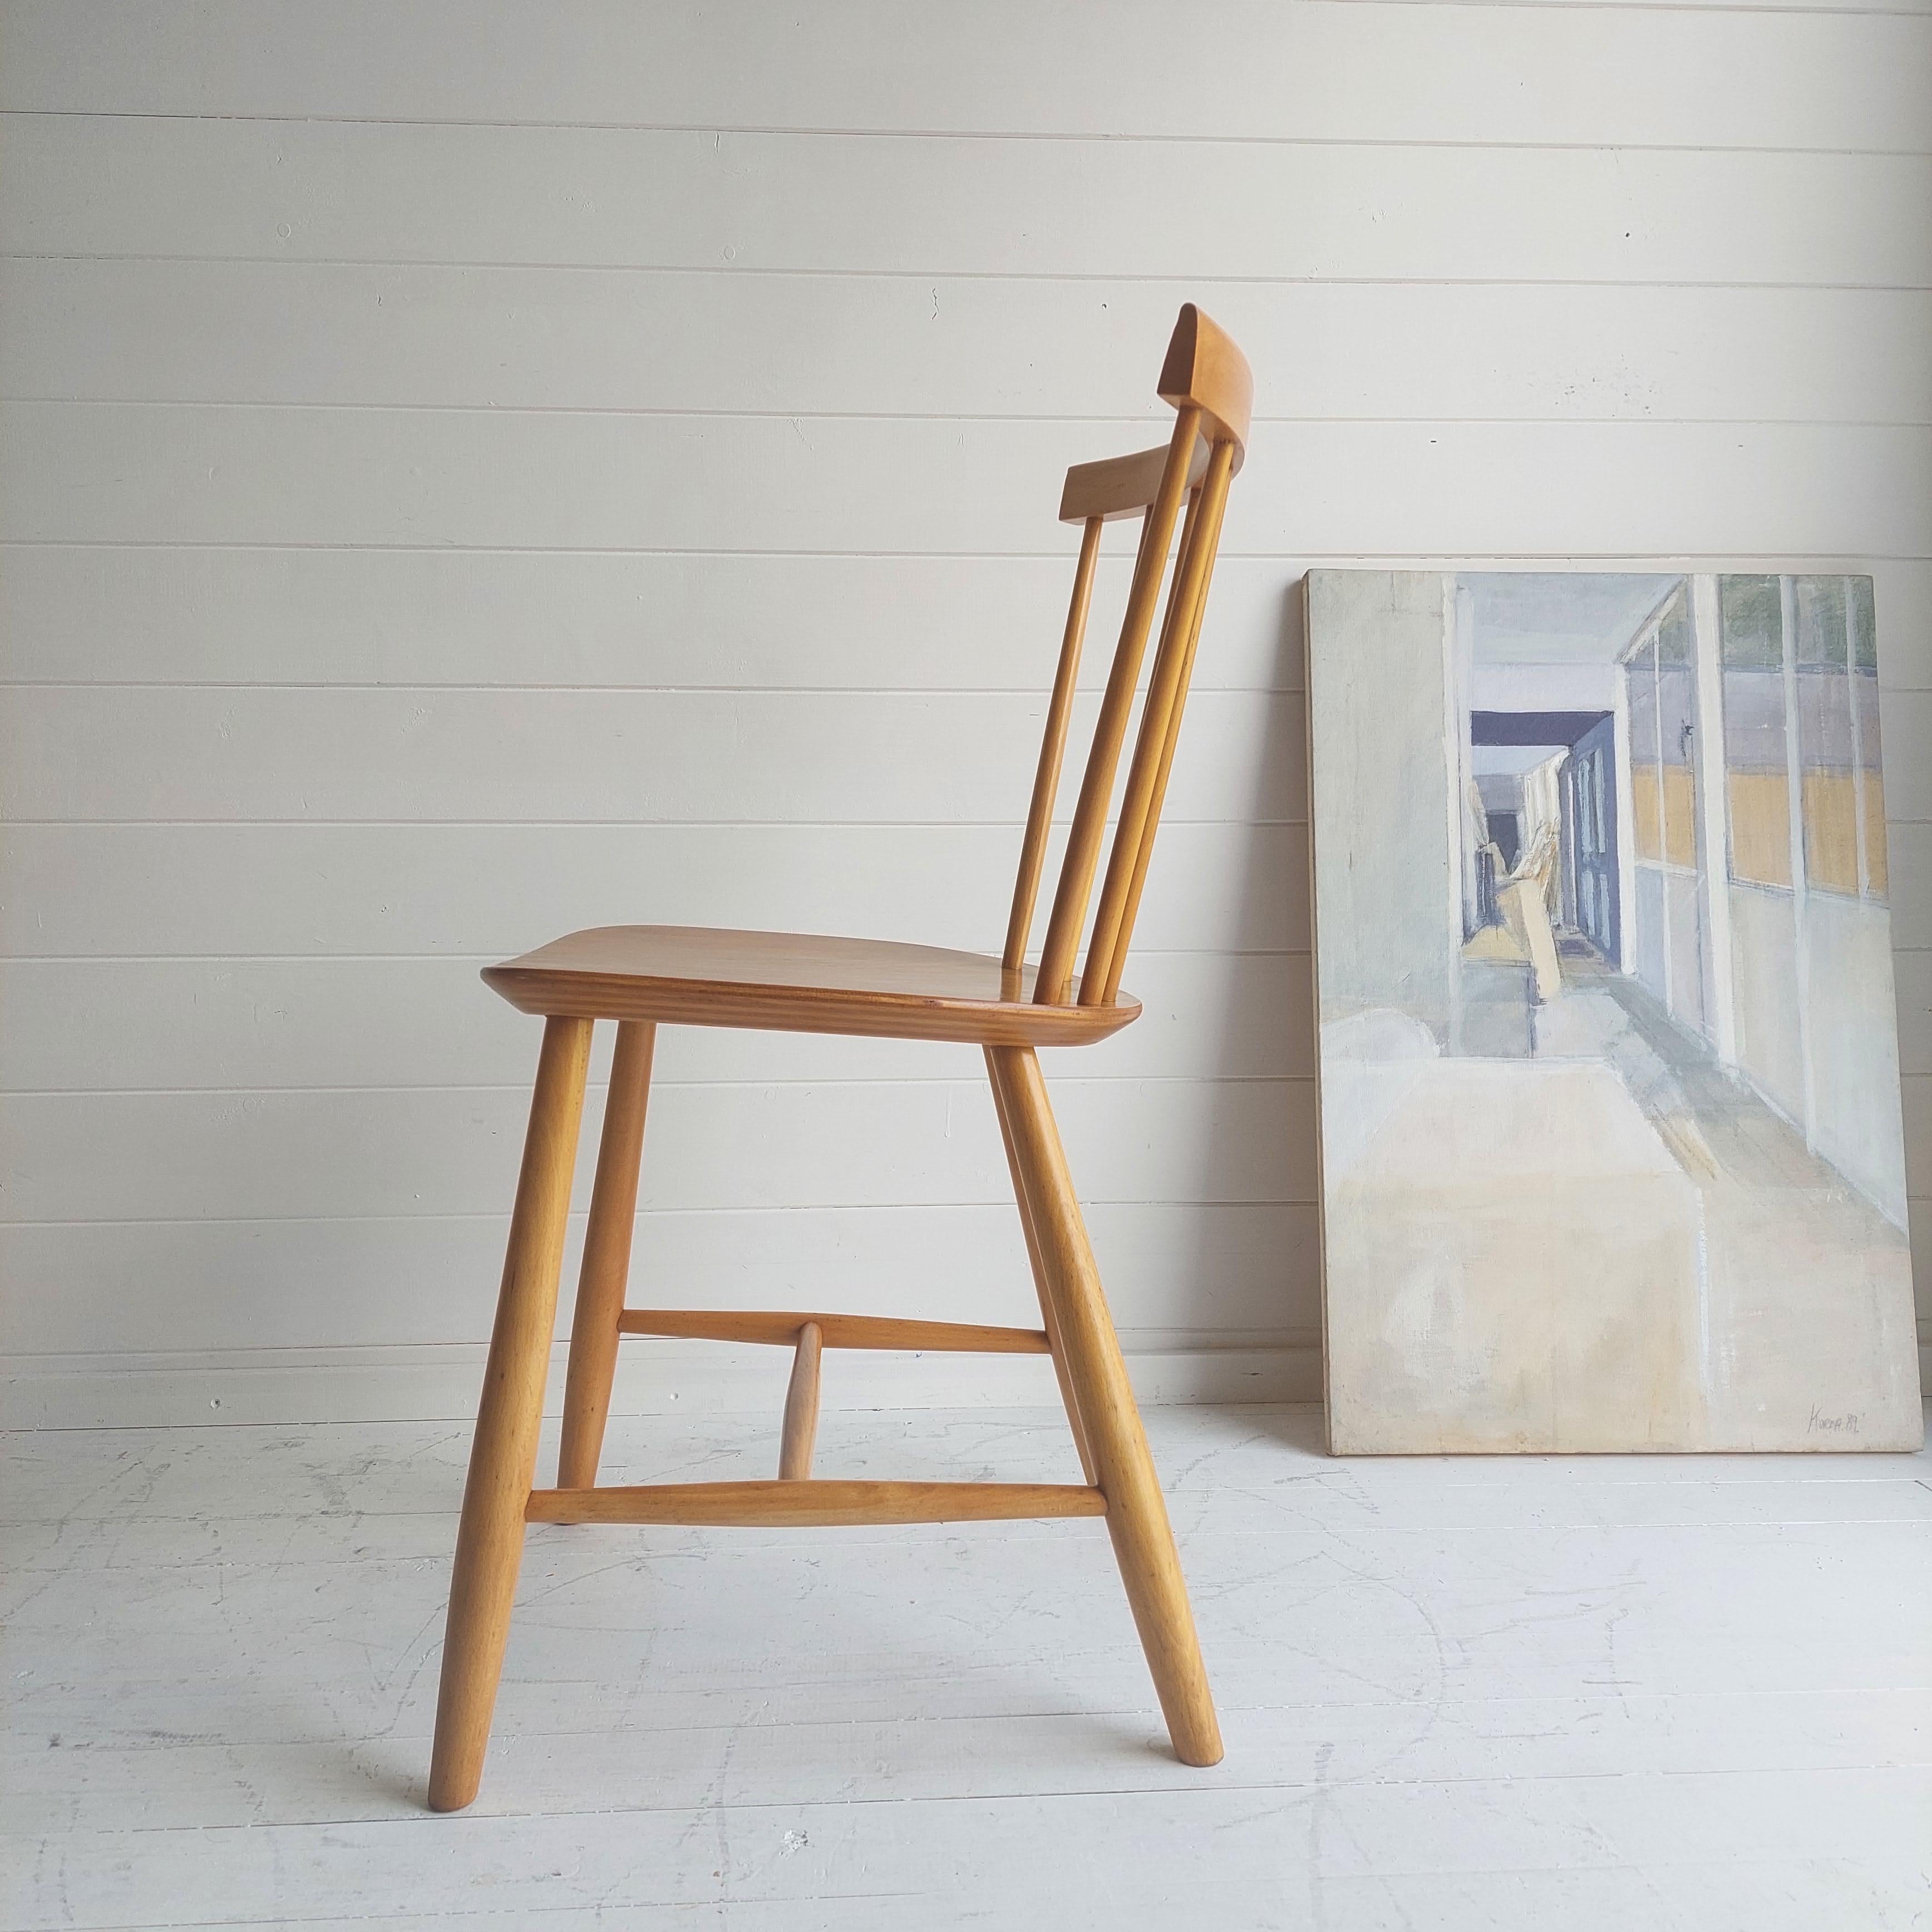 A stunning Poul Volther dining chair.
This elegant chair was designed for the Danish manufacturer FDB Mobler.
Very similar in style and construction to those produced by the English maker Ercol during the mid 20th century.
FDB Møbler’s J46 chair